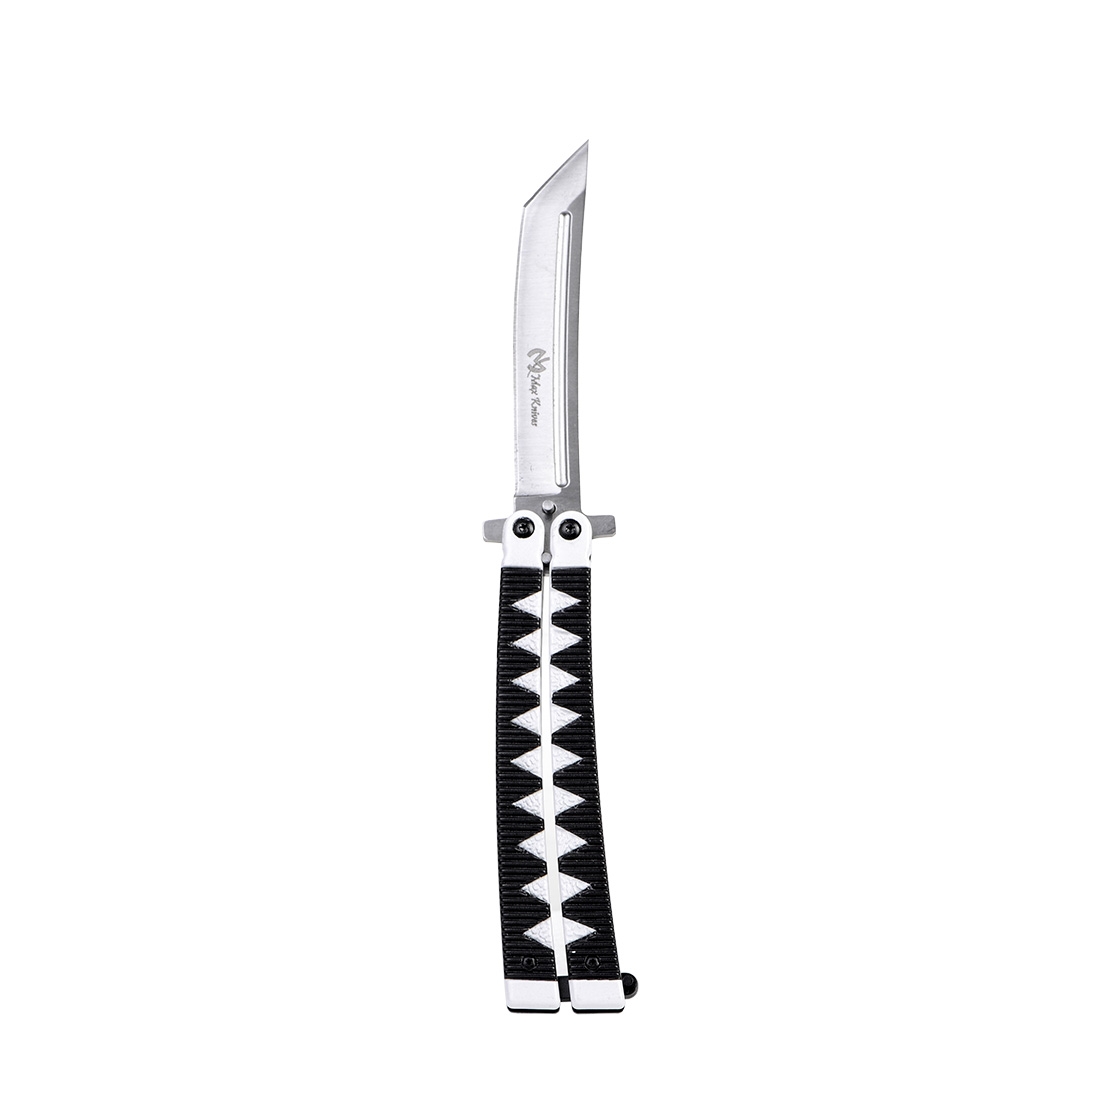 https://www.planete-sfactory.com/media//catalog/product/c/o/couteau_papillon_max_knives_p46s_cout-0095_bis2.jpg